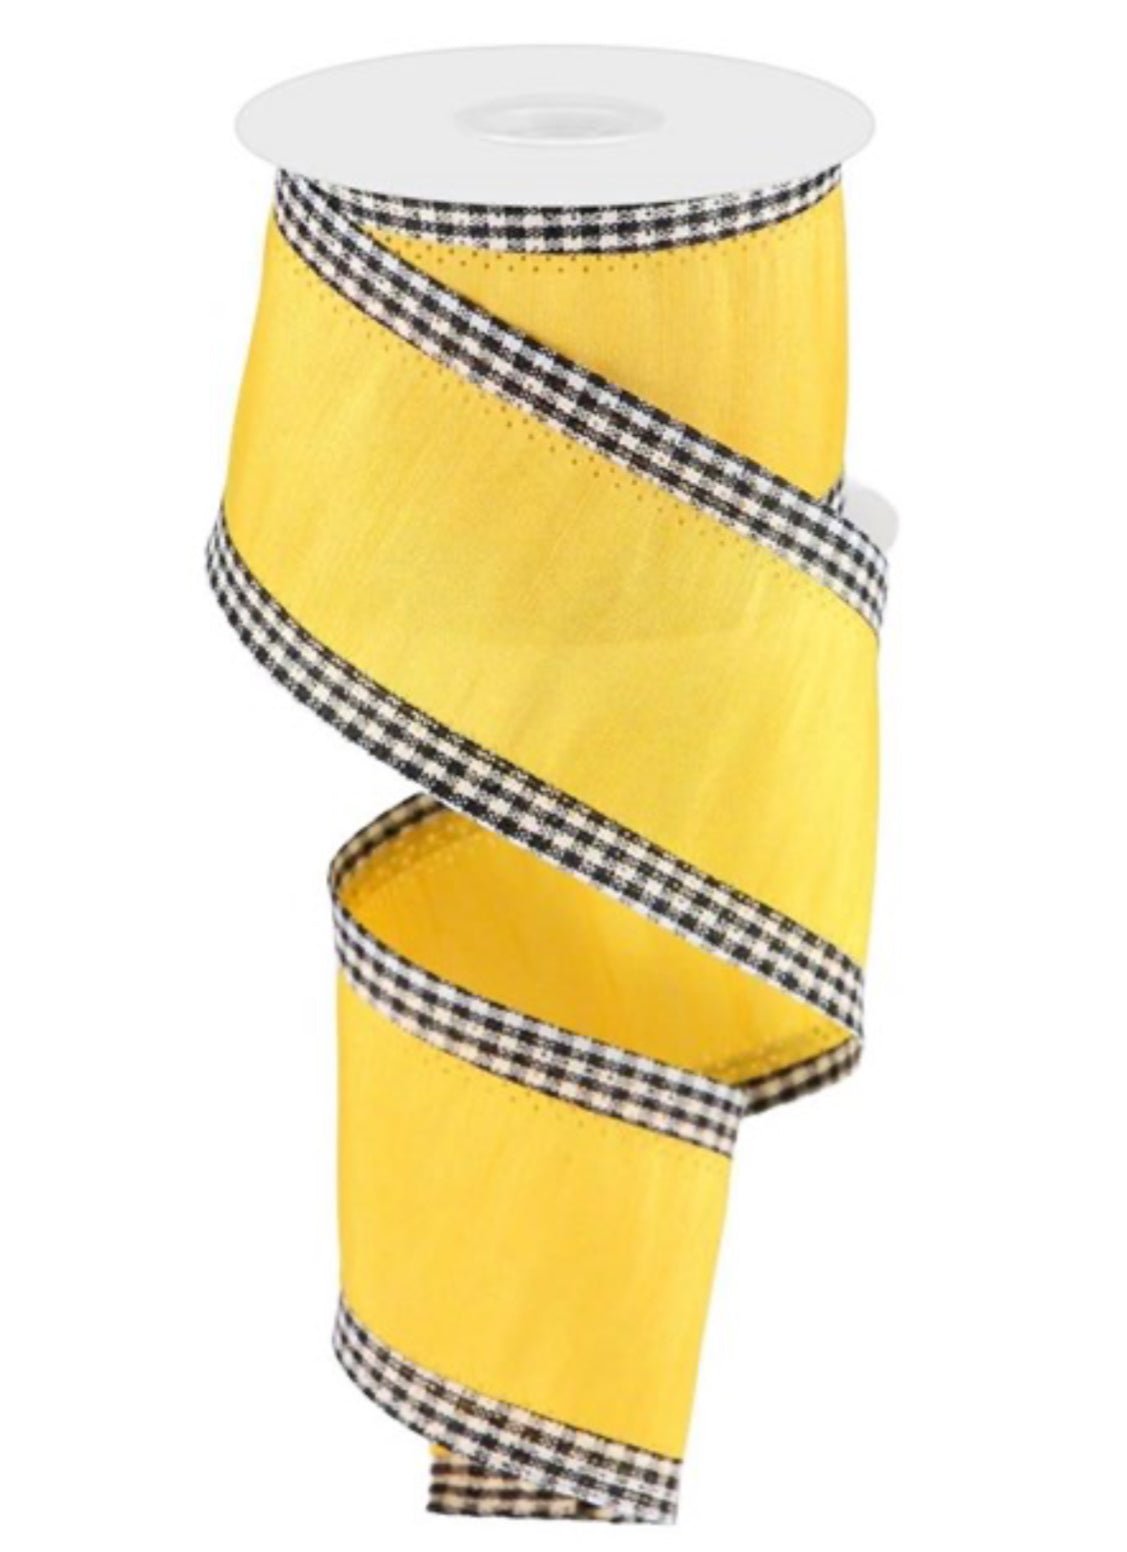 Yellow dupioni with gingham border wired ribbon 2.5” - Greenery MarketRG08321R1